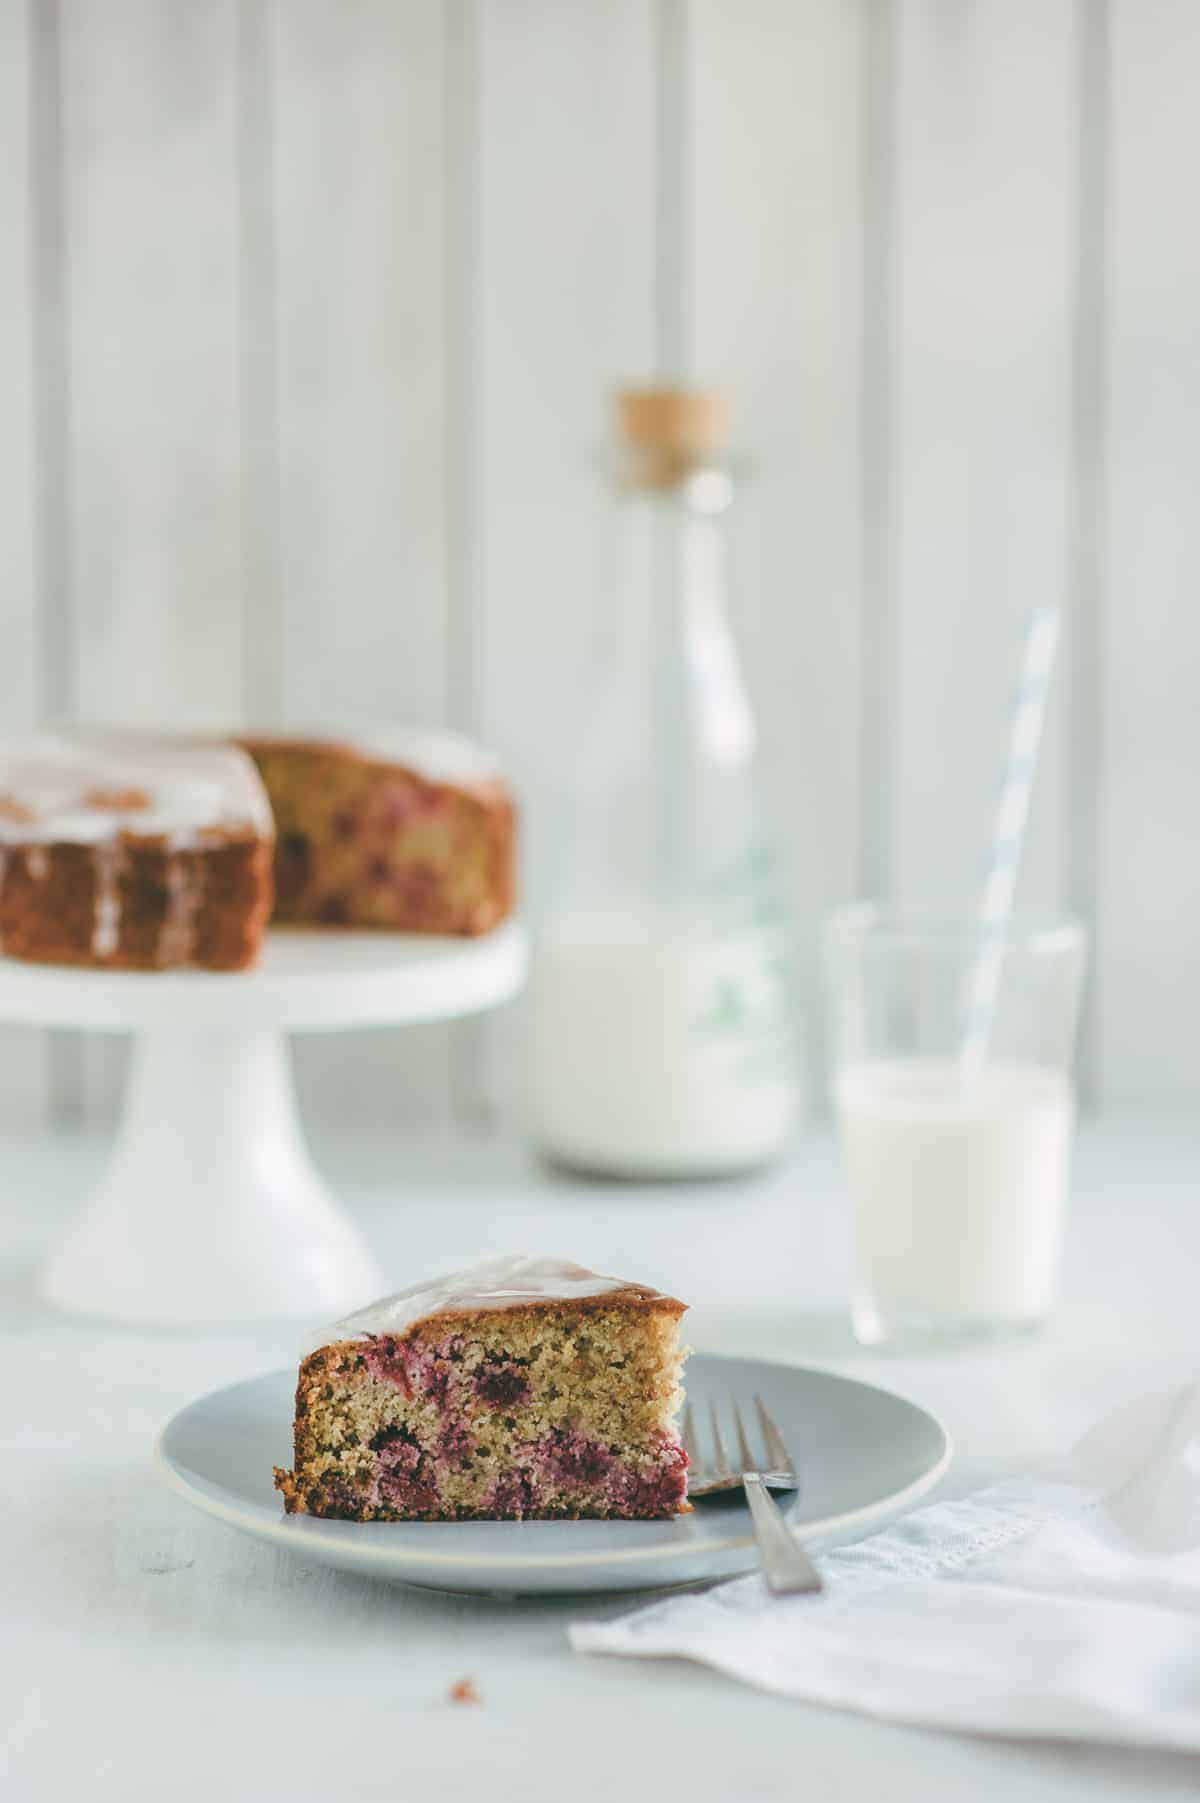 slice of cake made with almond meal and raspberries